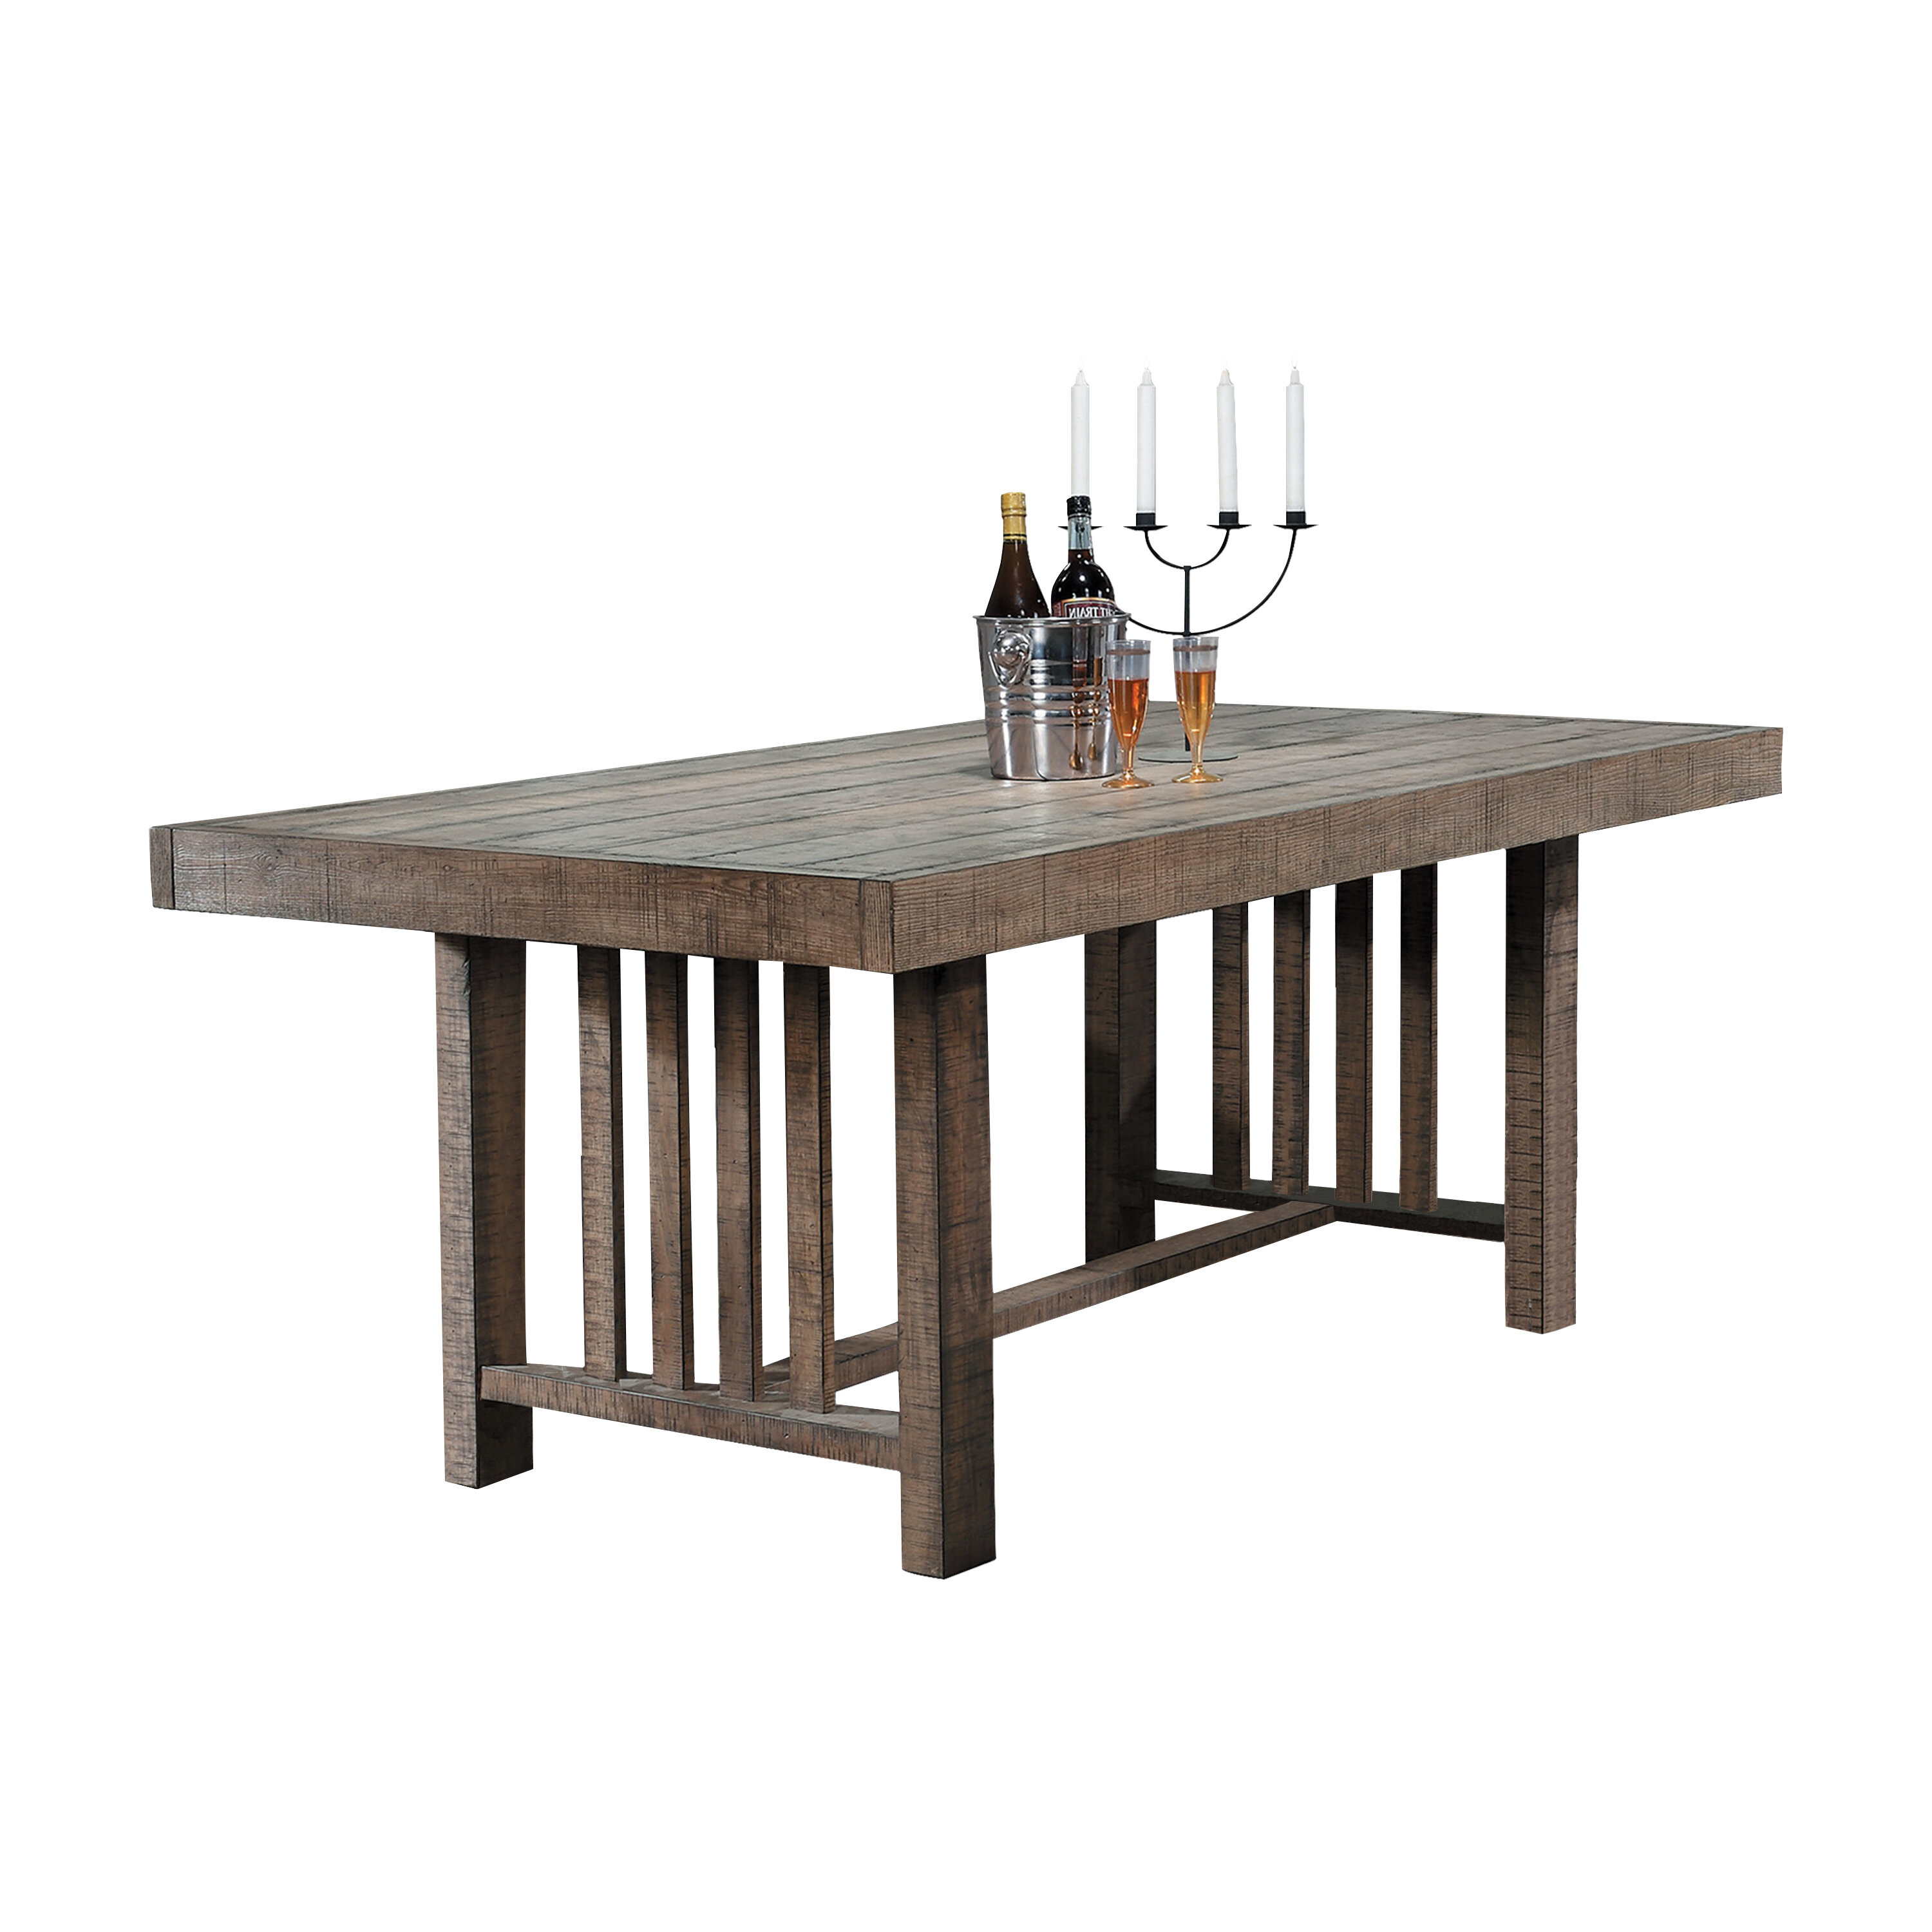 Union Rustic Huang Solid Wood Dining Table Reviews Wayfair